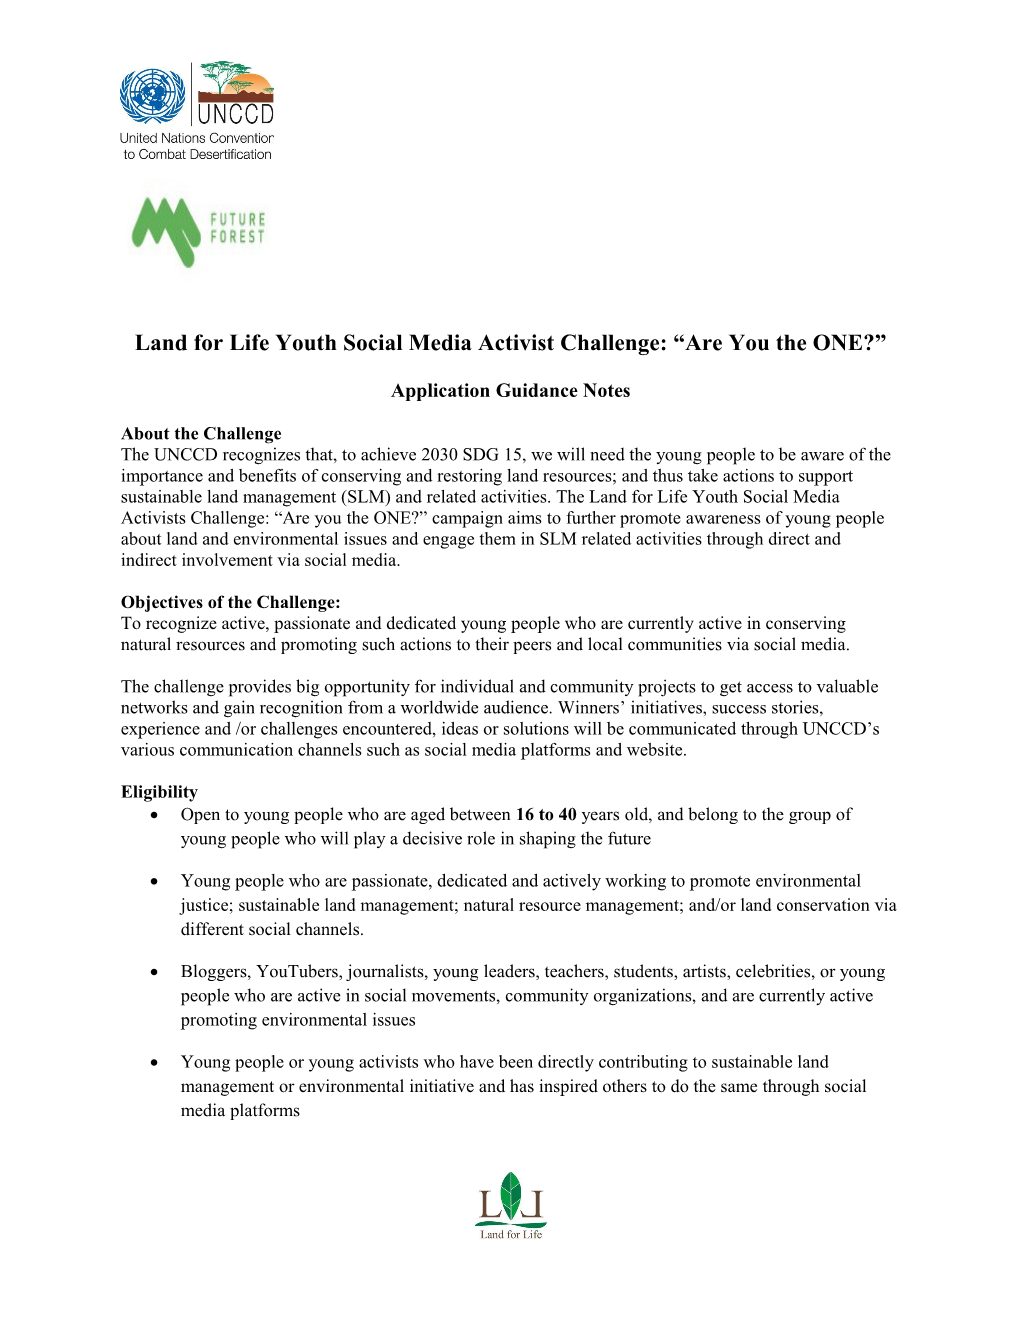 Land for Life Youth Social Media Activist Challenge: Are You the ONE?